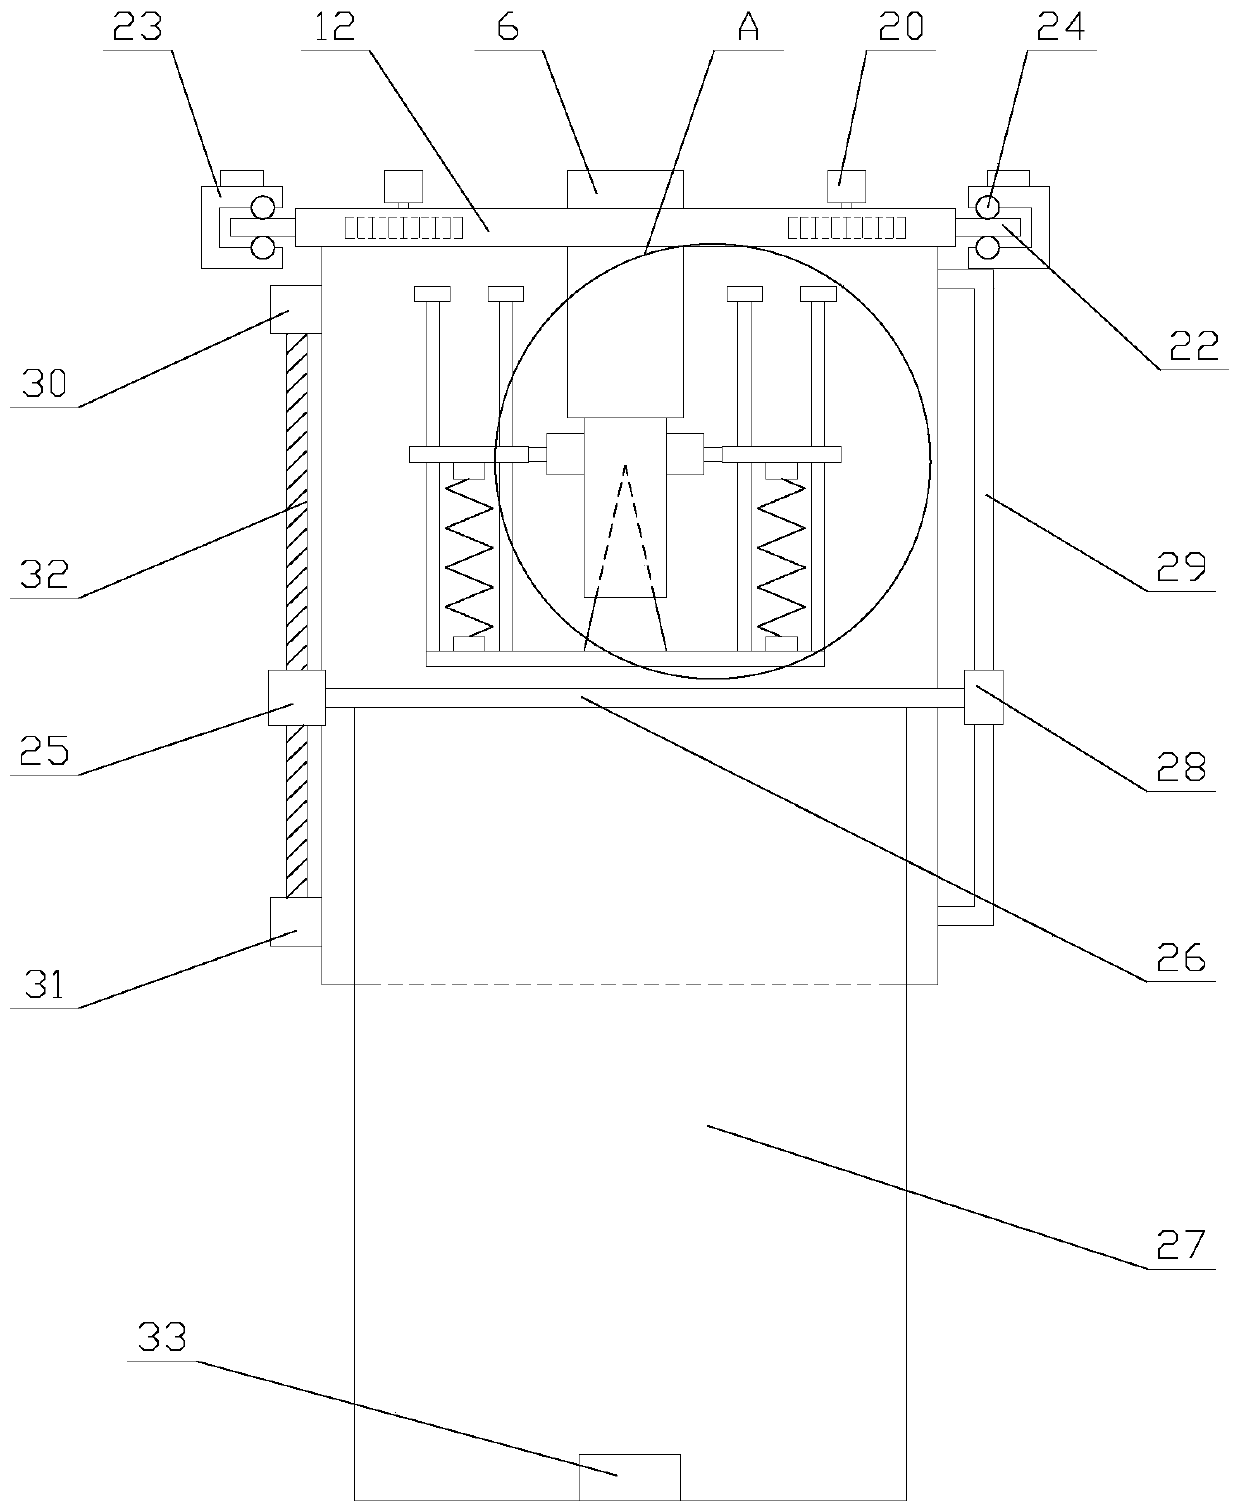 Mobile drip irrigation device with accurate irrigation for agricultural production